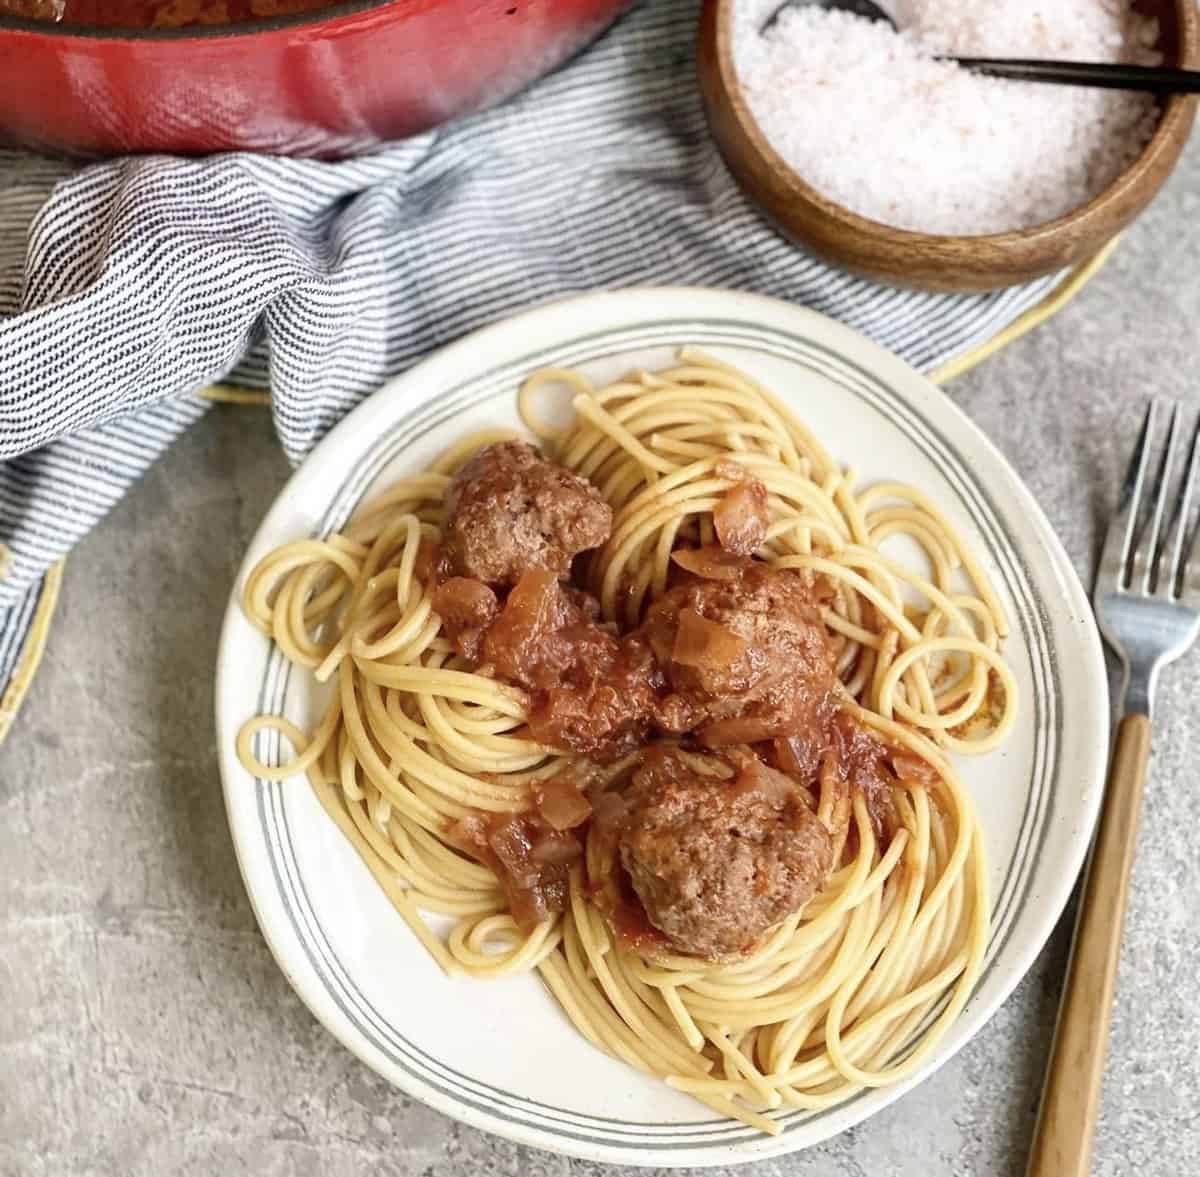 Perfect Meatballs in Sweet Tomato-Based Sauce With Spaghetti